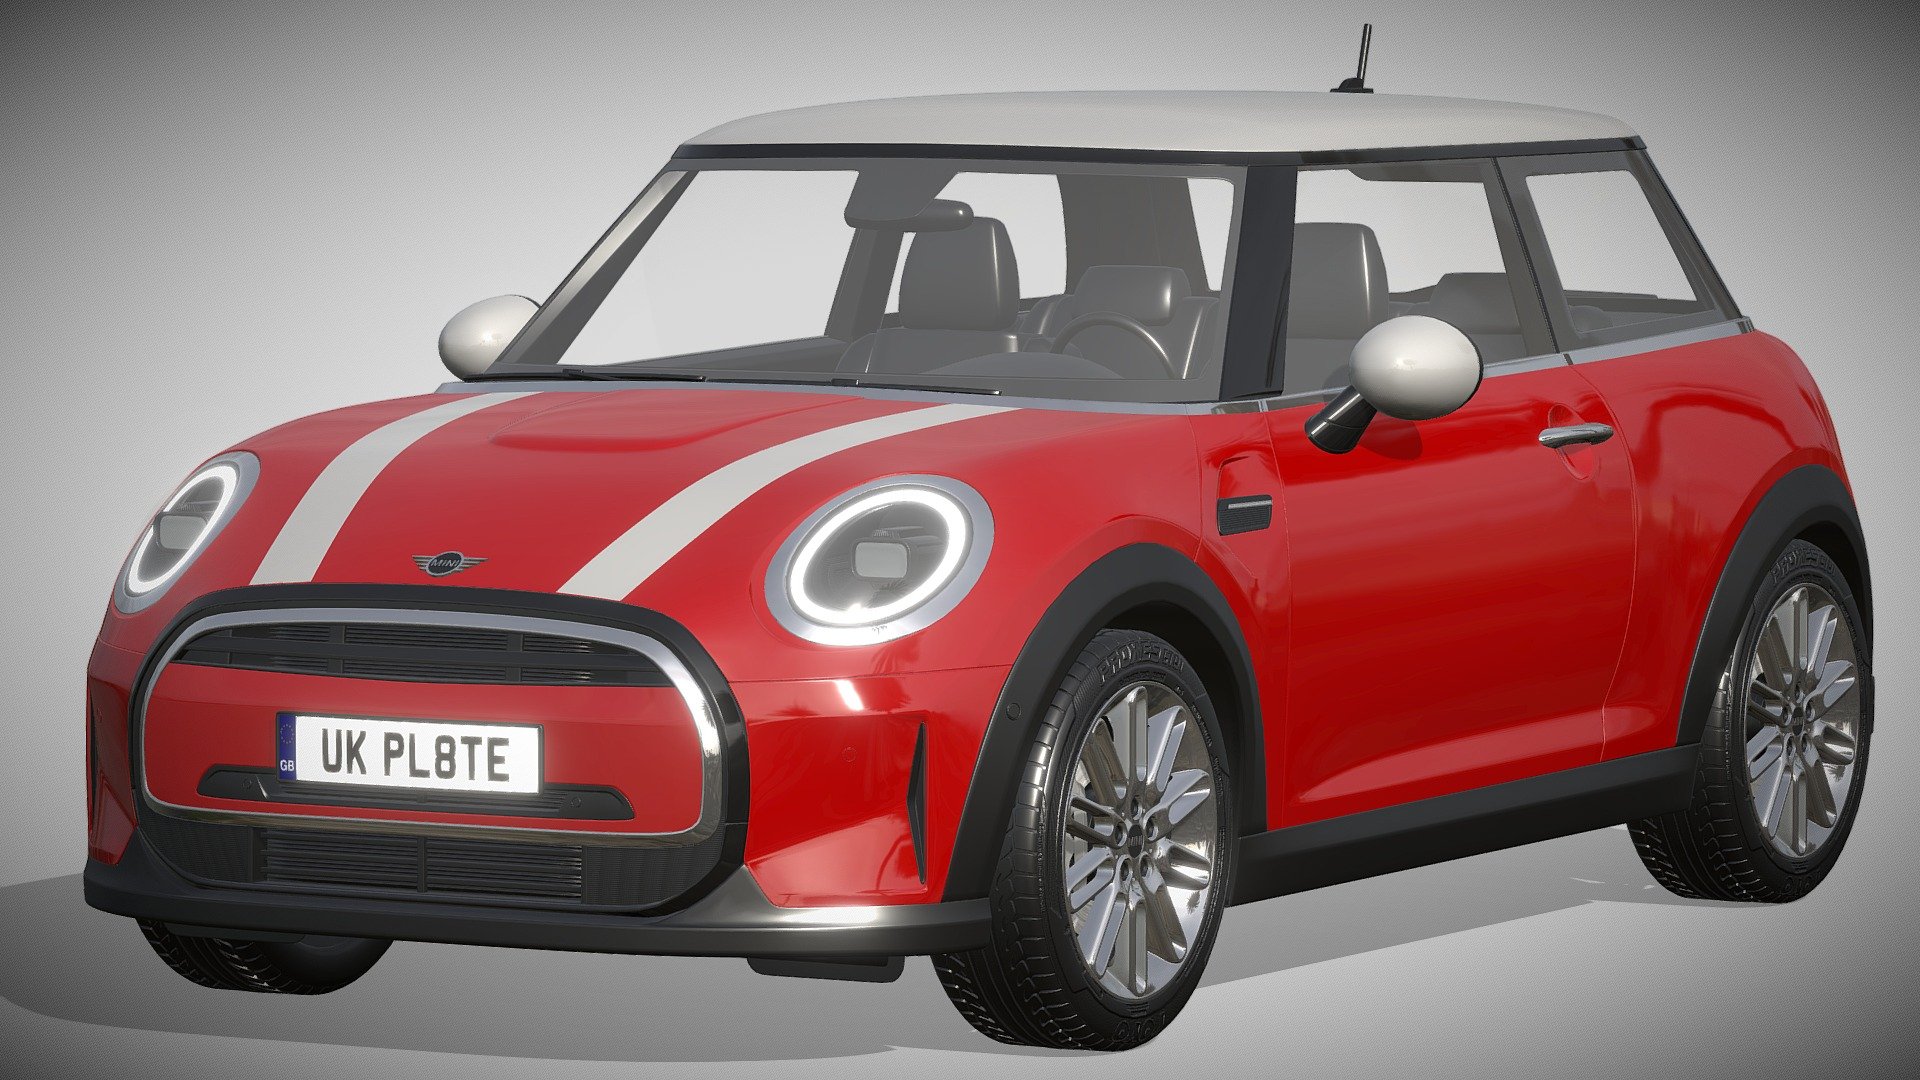 Mini Cooper 3-door 2022

https://www.miniusa.com/model/hardtop.html

Clean geometry Light weight model, yet completely detailed for HI-Res renders. Use for movies, Advertisements or games

Corona render and materials

All textures include in *.rar files

Lighting setup is not included in the file! - Mini Cooper 3-door 2022 - Buy Royalty Free 3D model by zifir3d 3d model